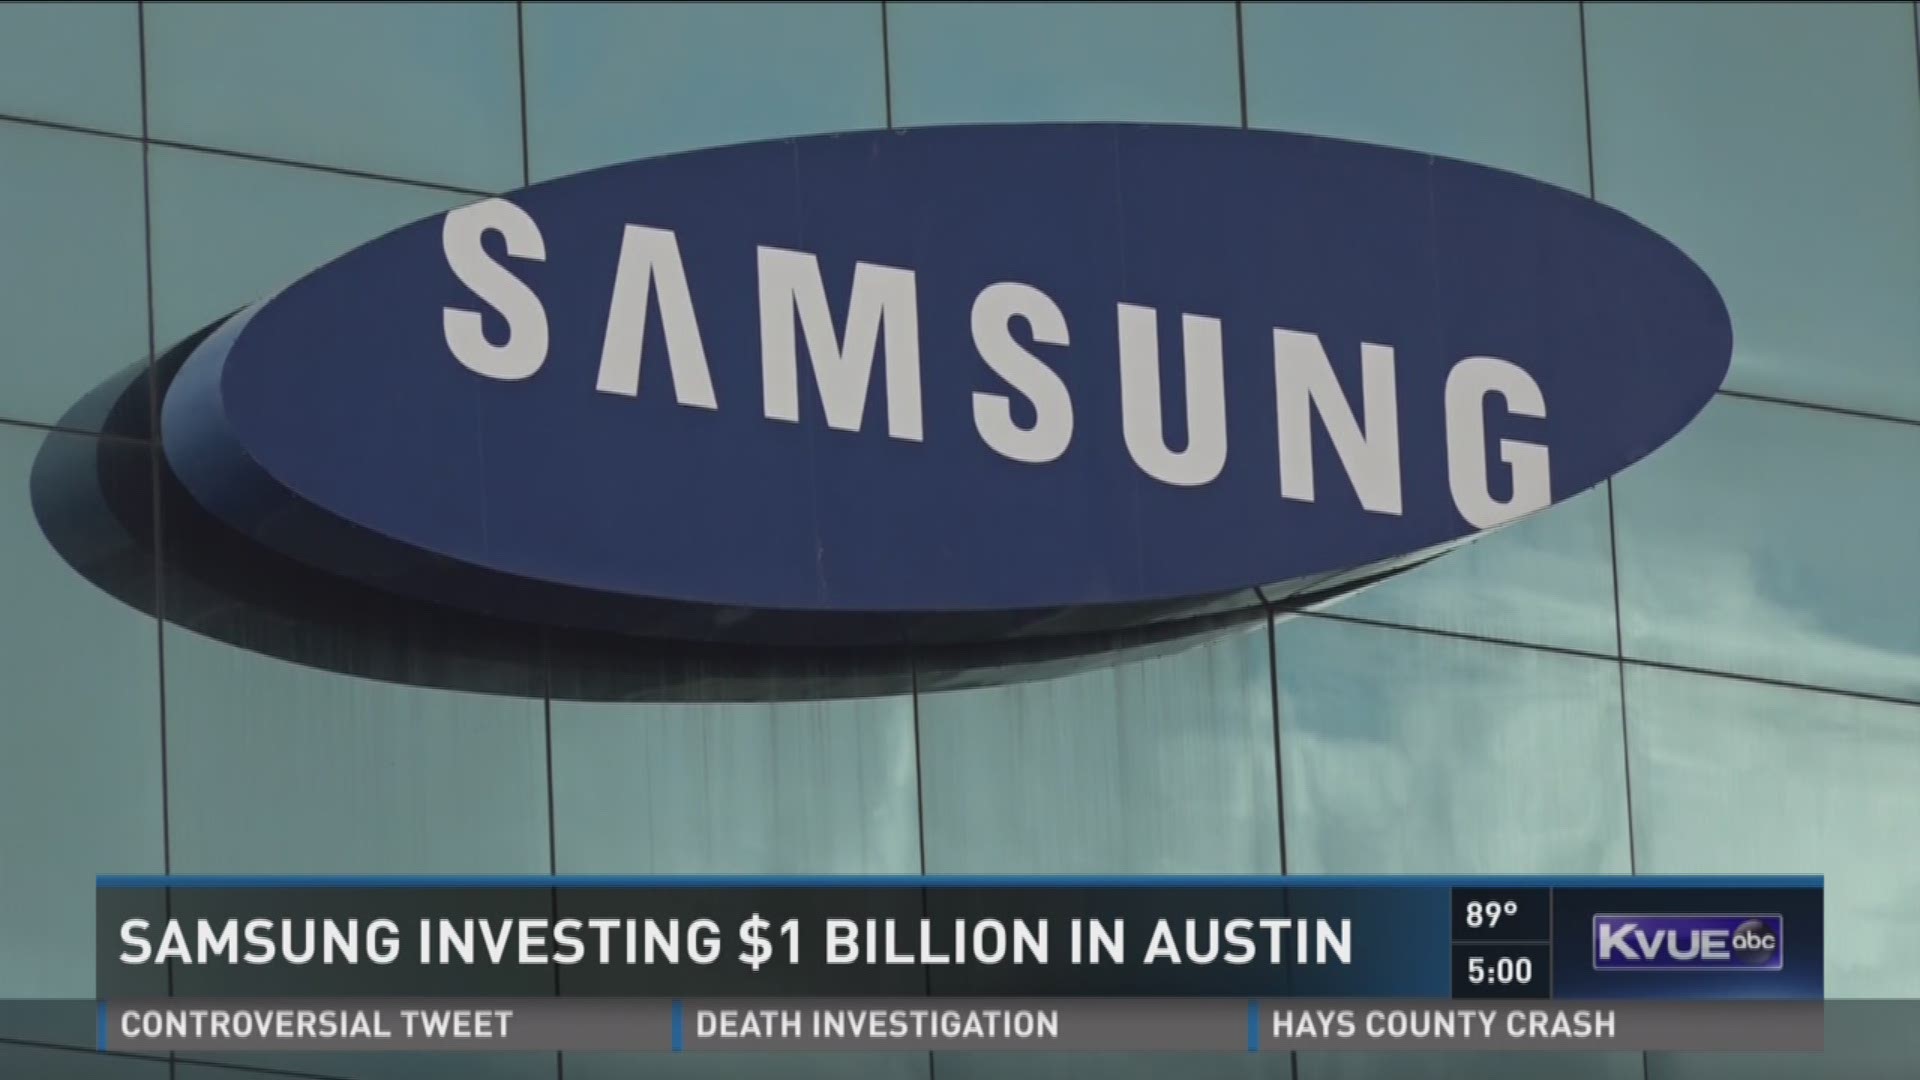 The investment is expected to bring 250-500 jobs to the Austin area.